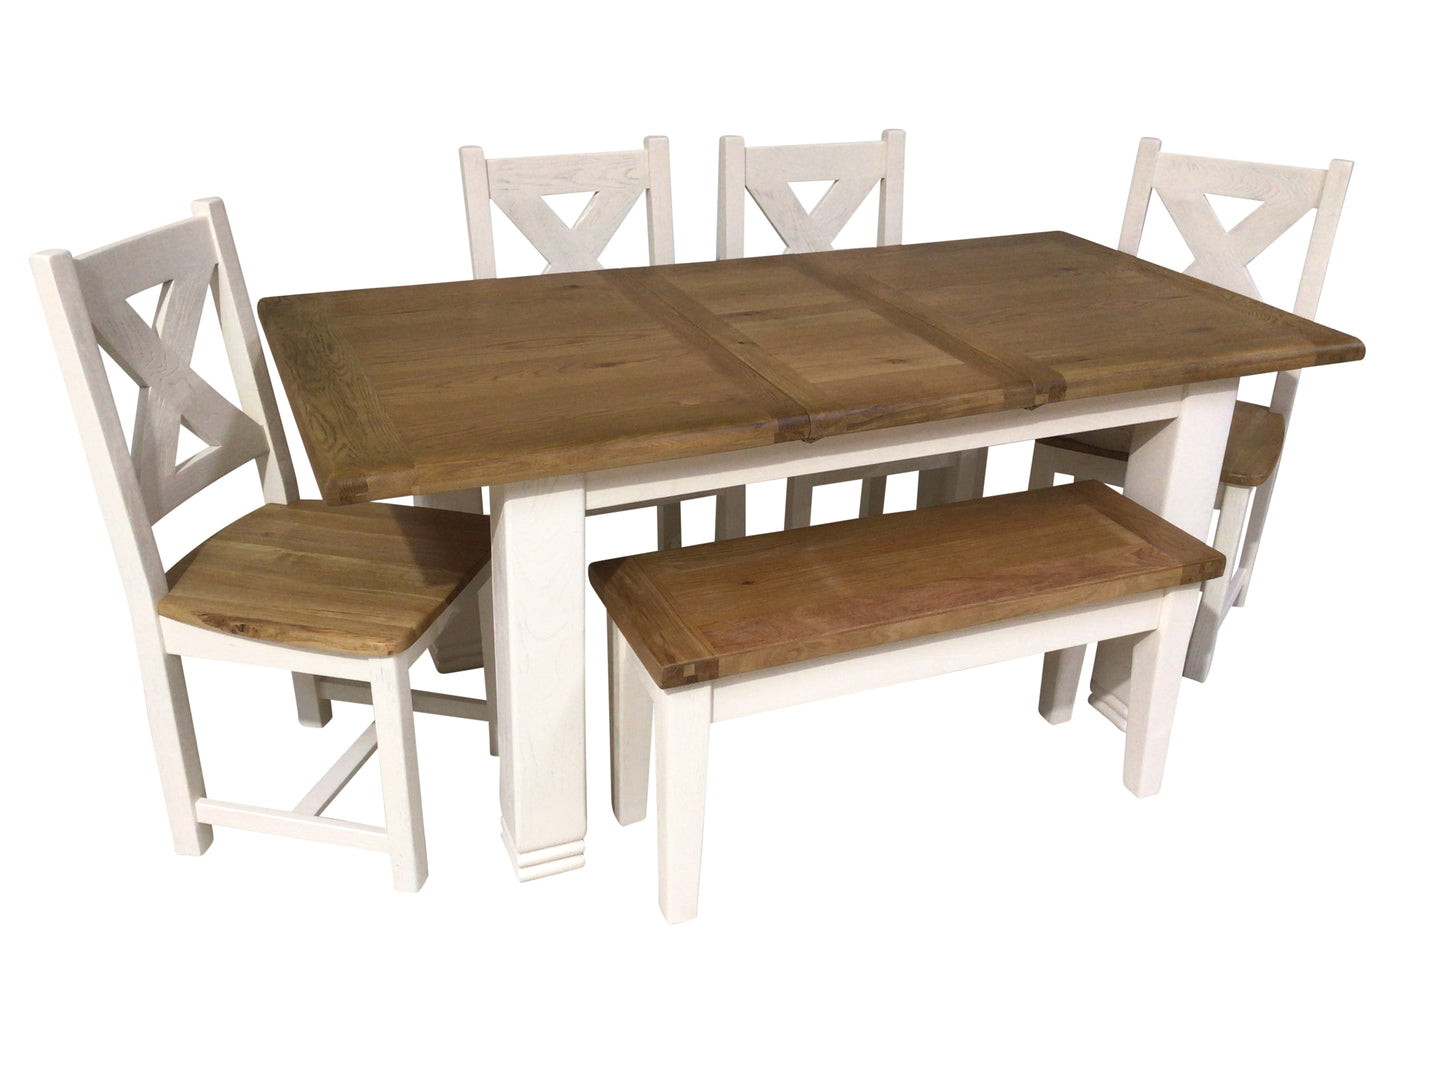 Danube Off-White 1.4m Ext Dining Set with Cross-Back Dining Chairs